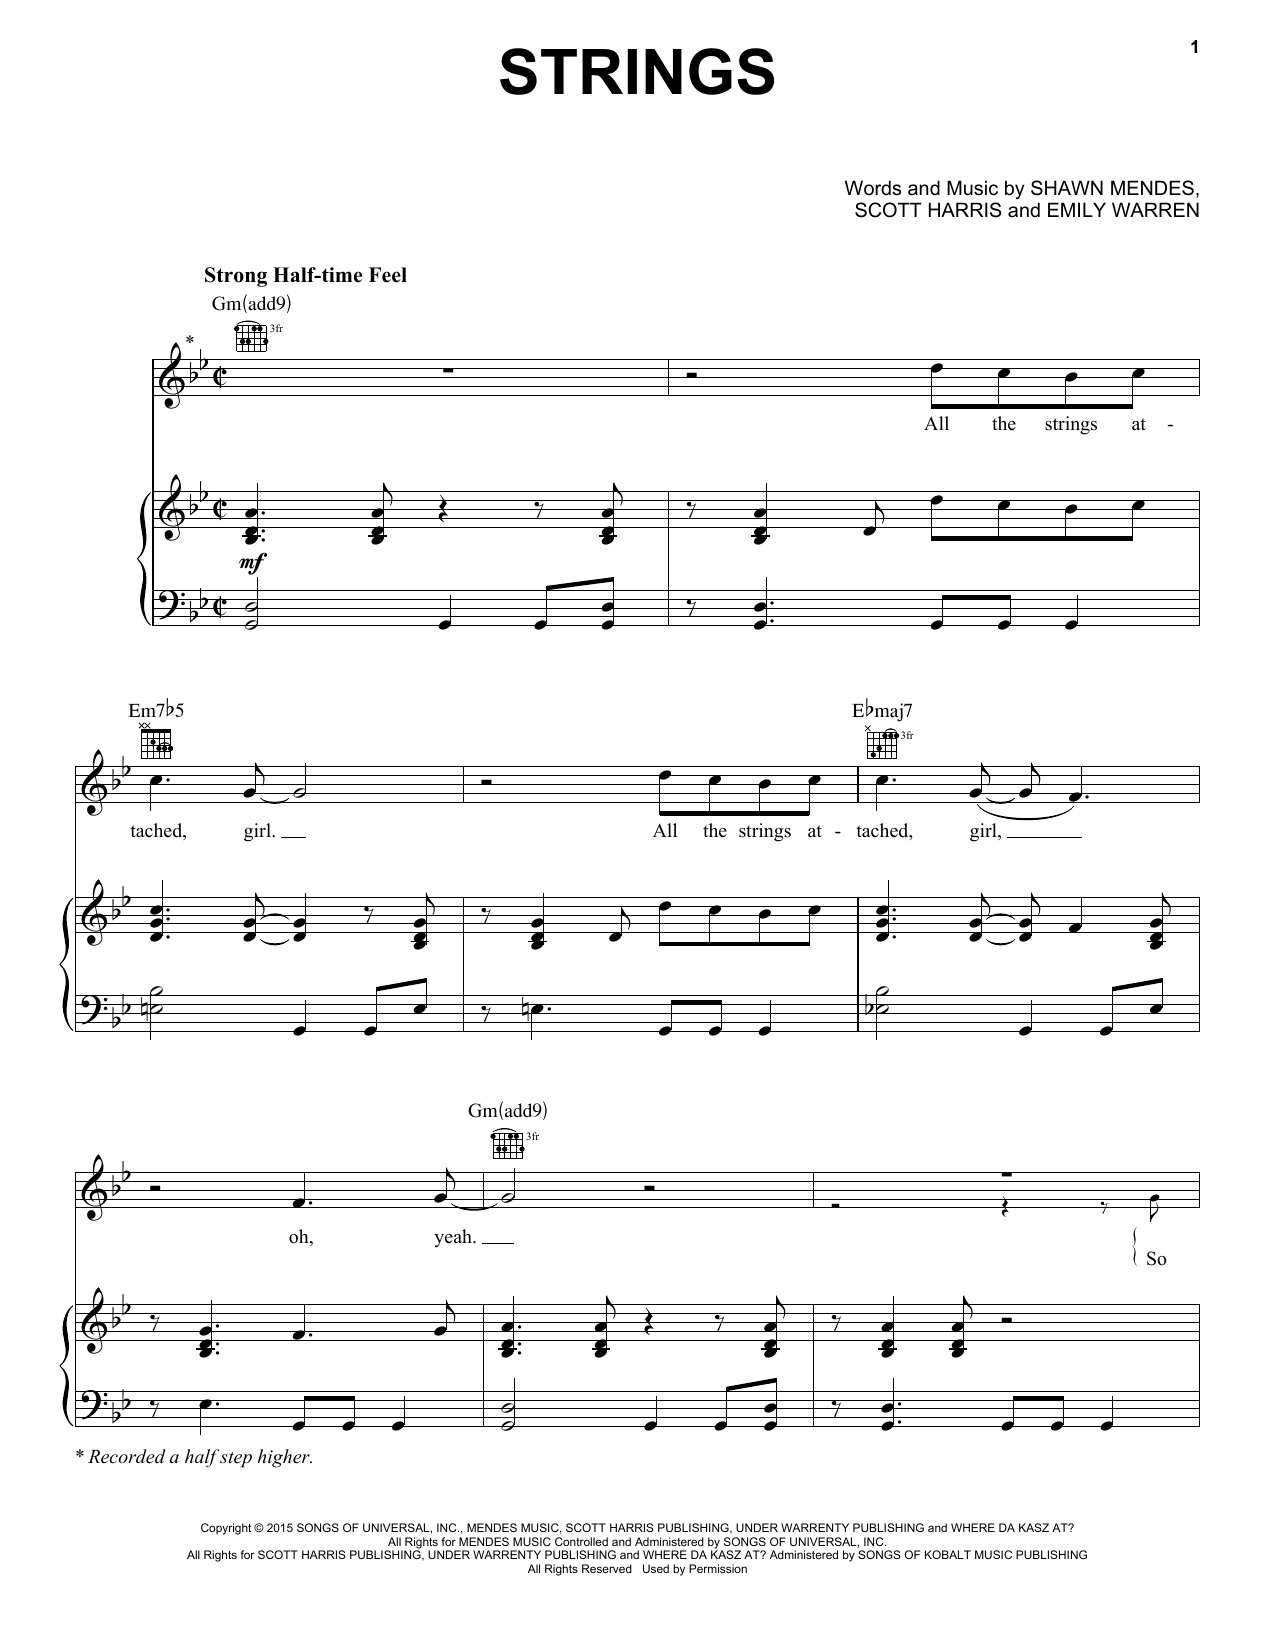 Download Shawn Mendes Strings Sheet Music